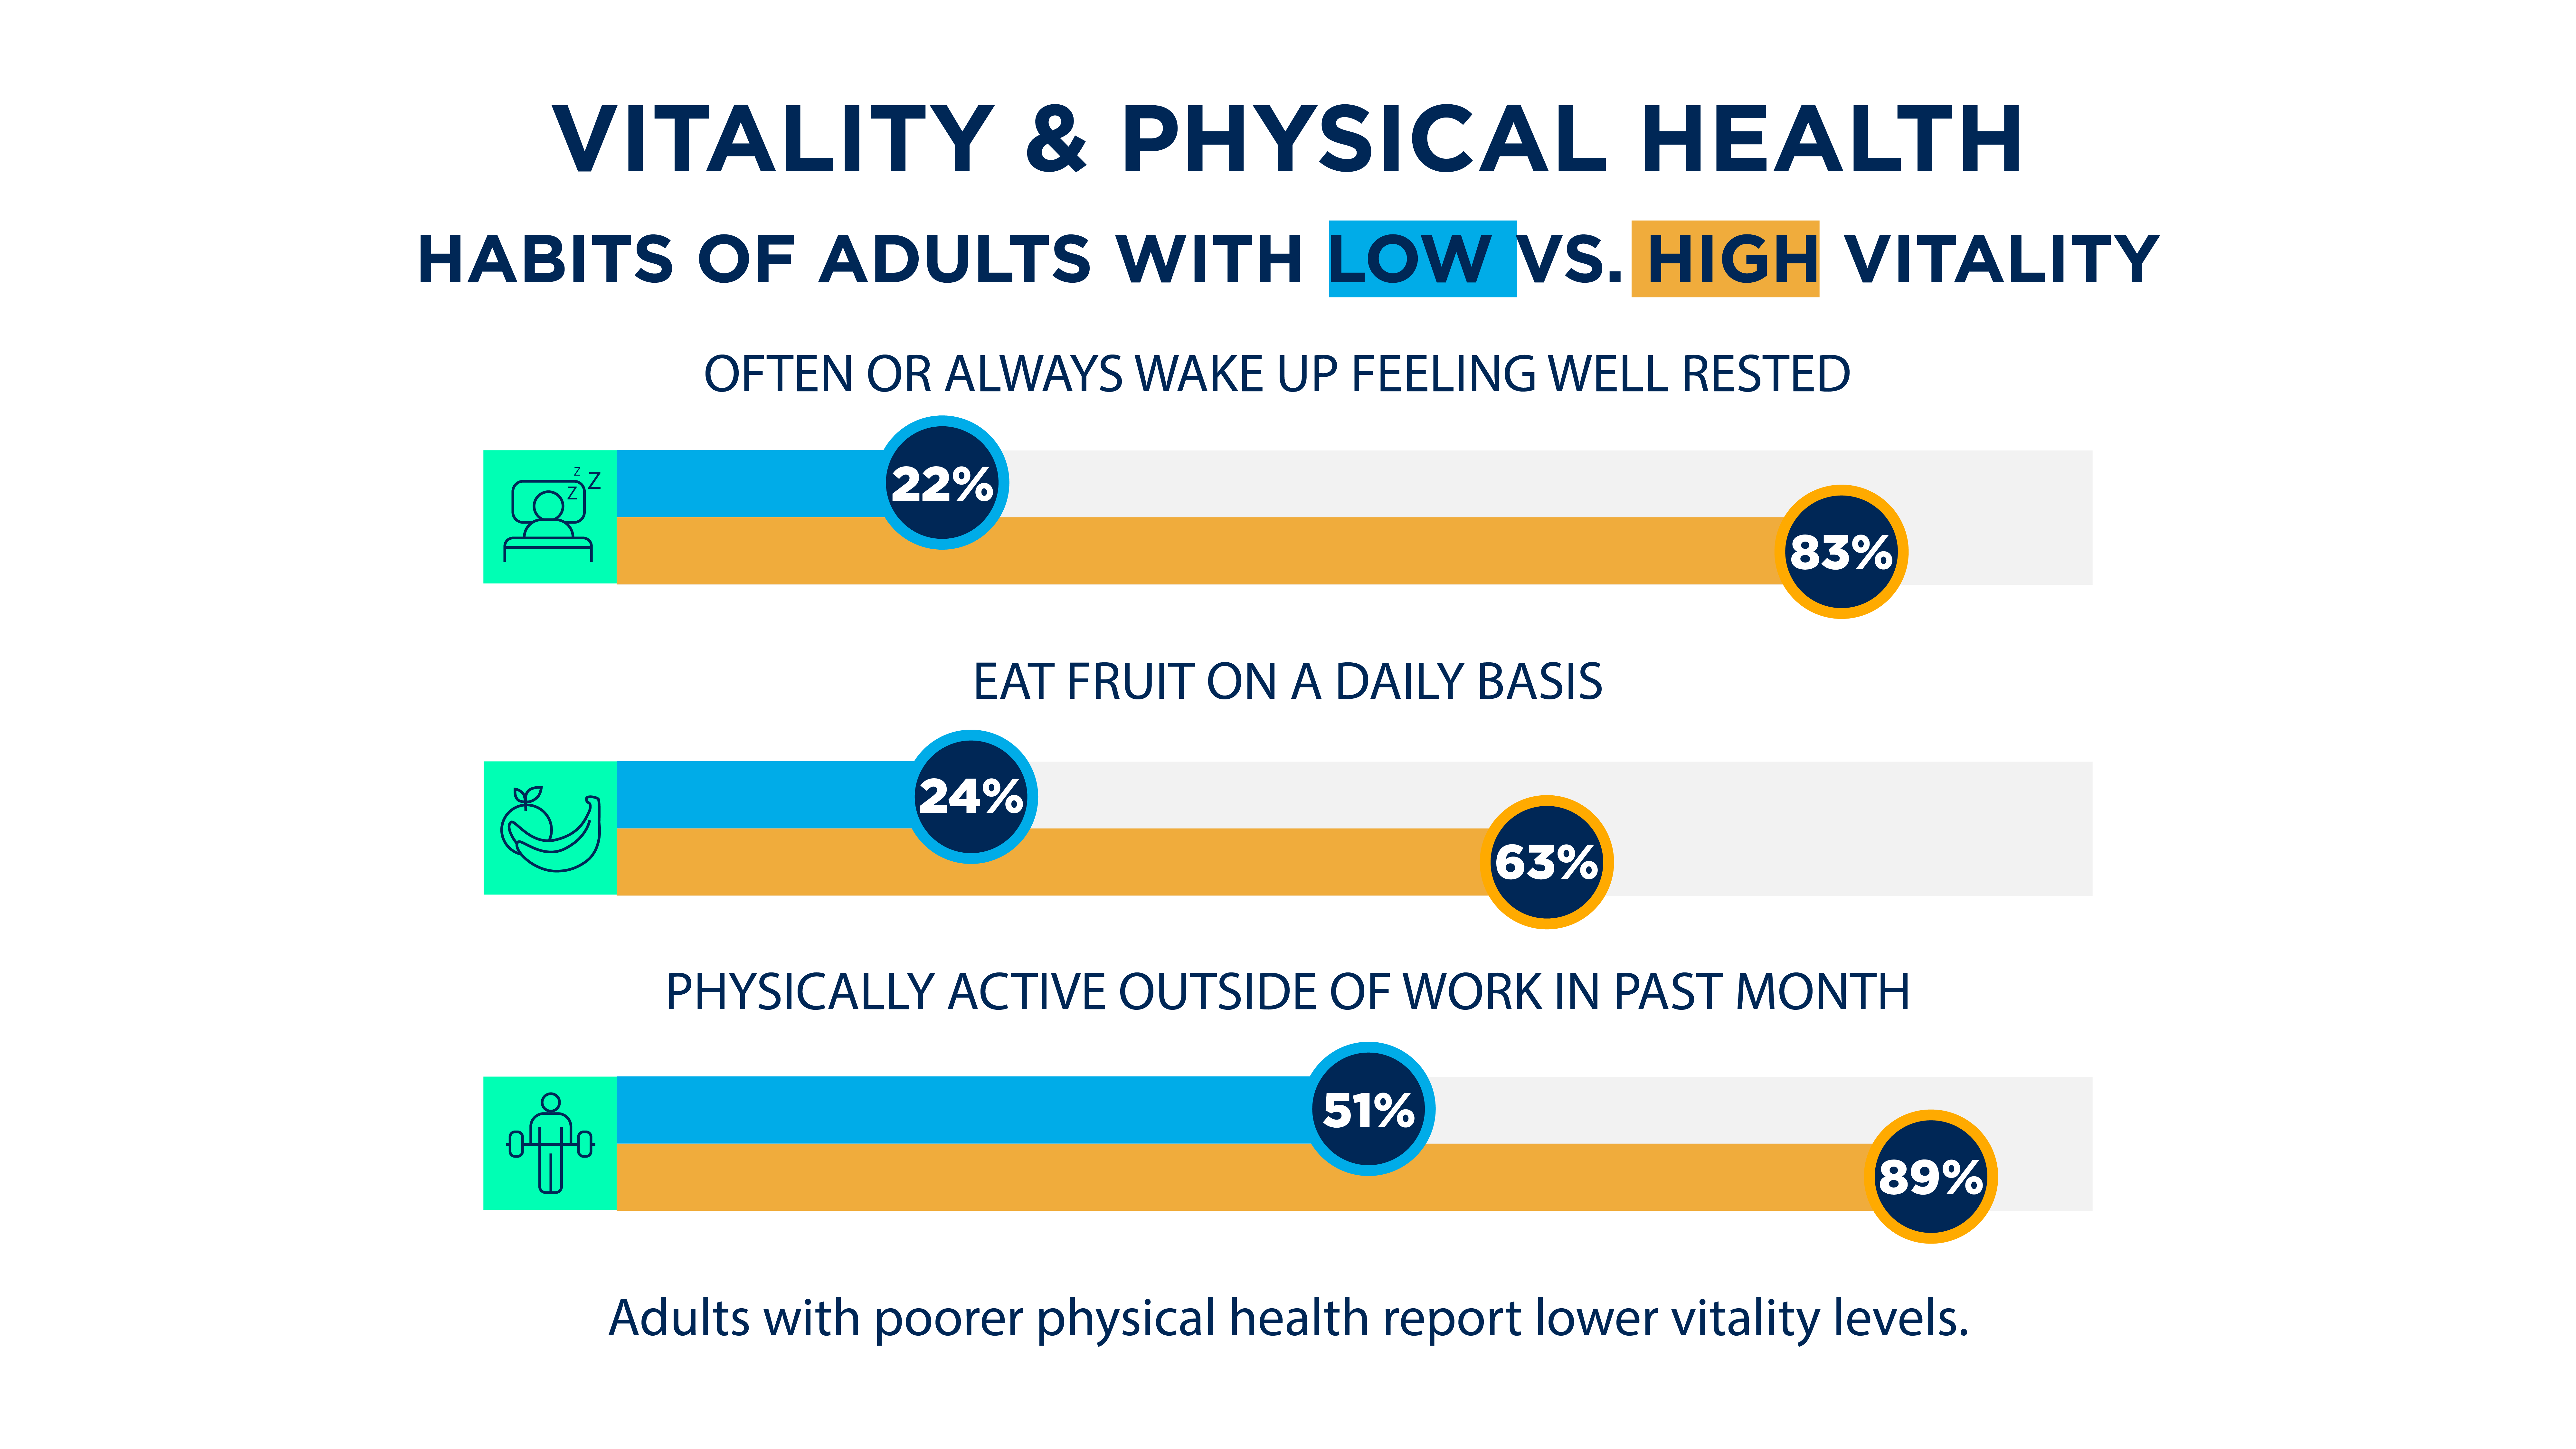 Habits of adults with low vs. high vitality